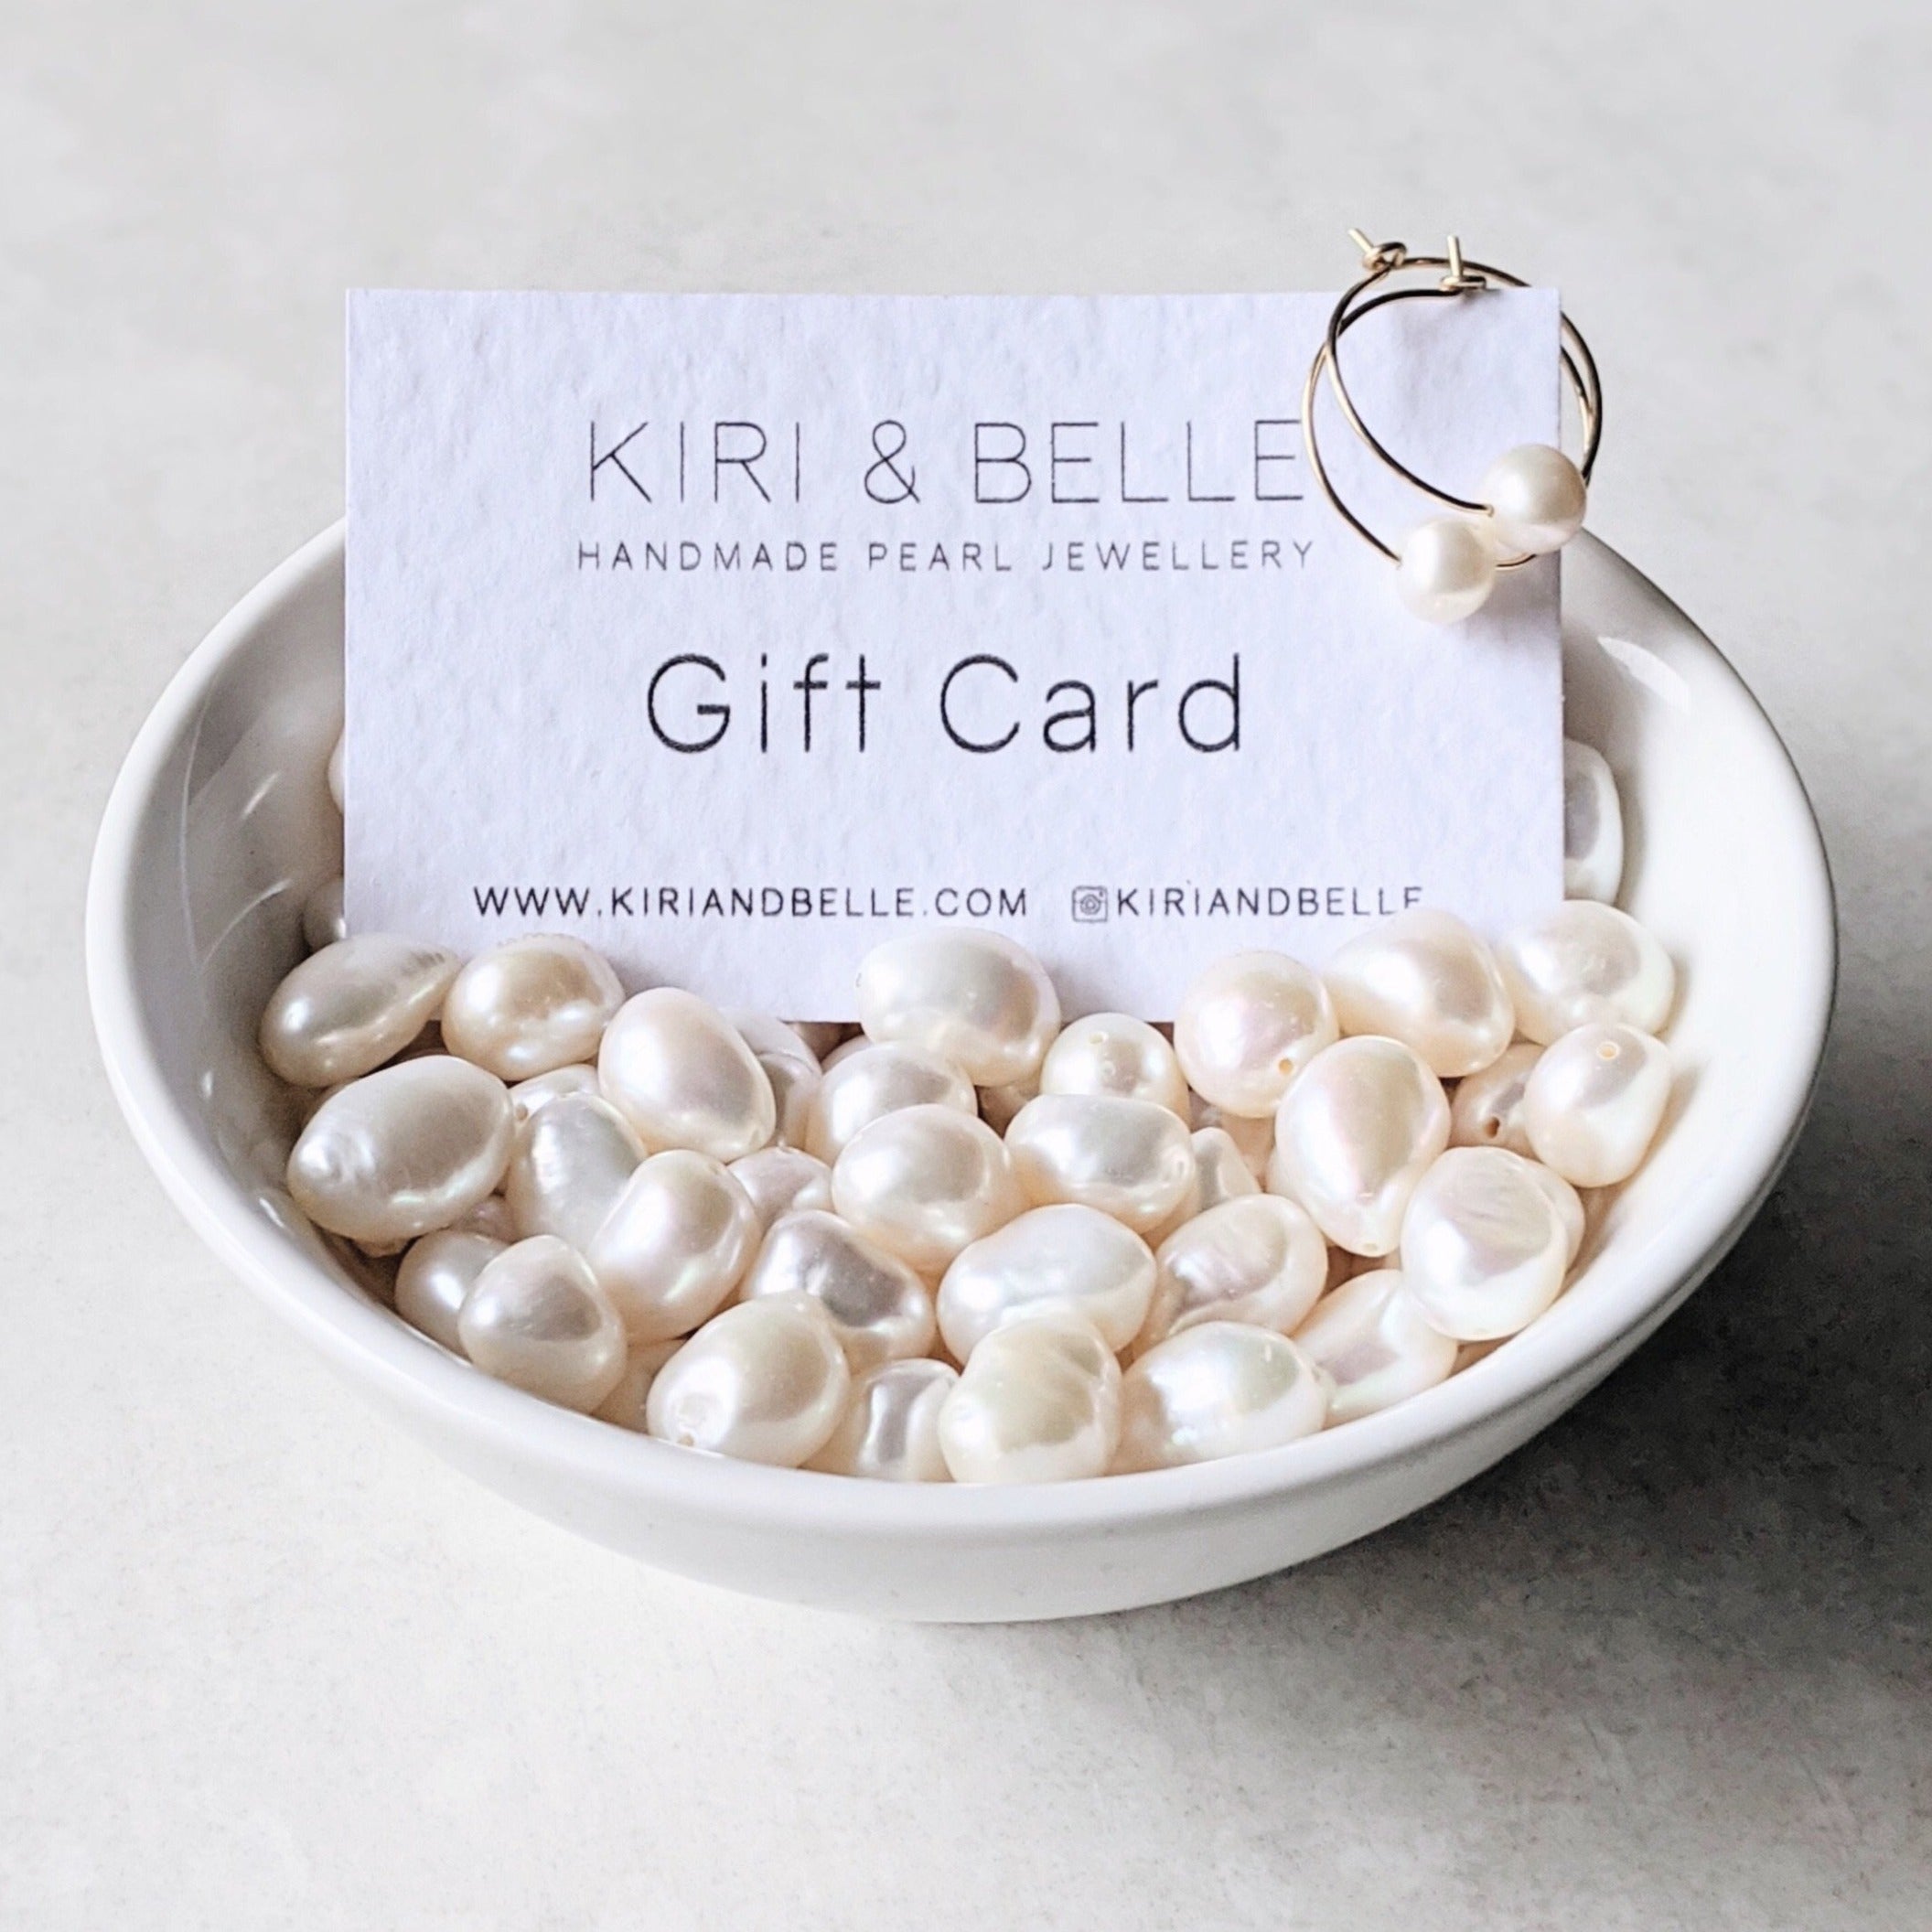 Gift card in bowl of white large baroque pearls